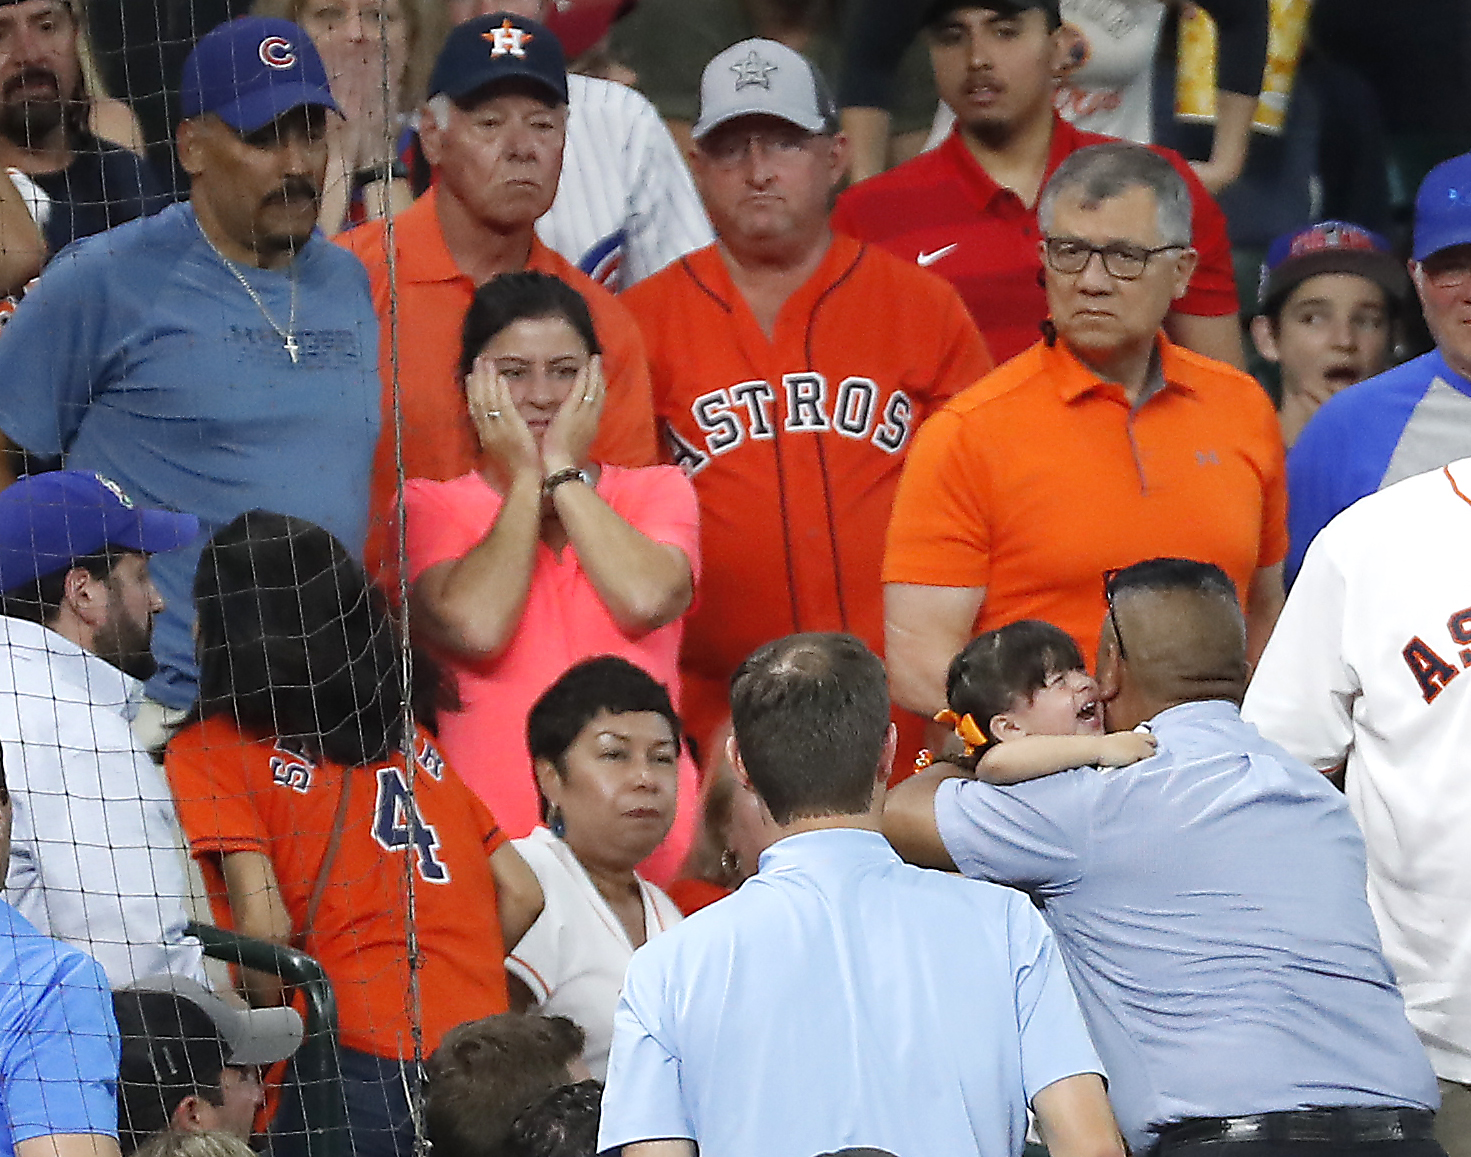 Young fan struck by foul ball during Astros-Cubs game - Houston Chronicle1471 x 1157